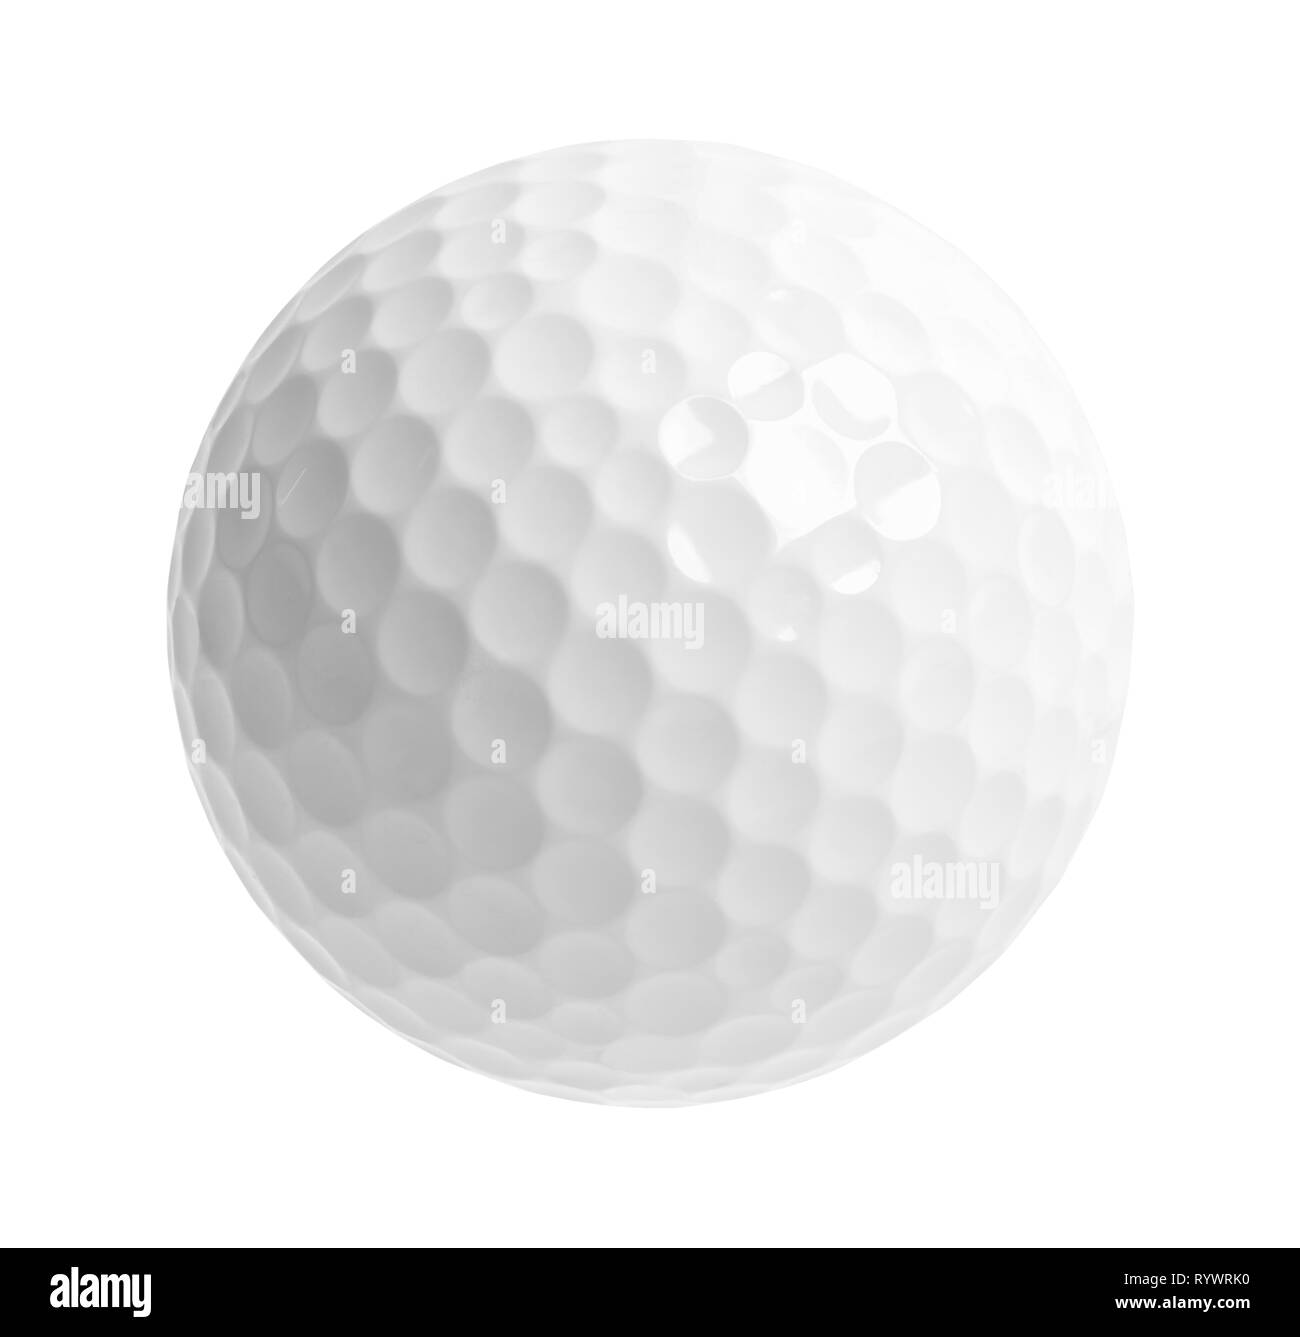 Ball Cut Out Stock Images & Pictures - Alamy